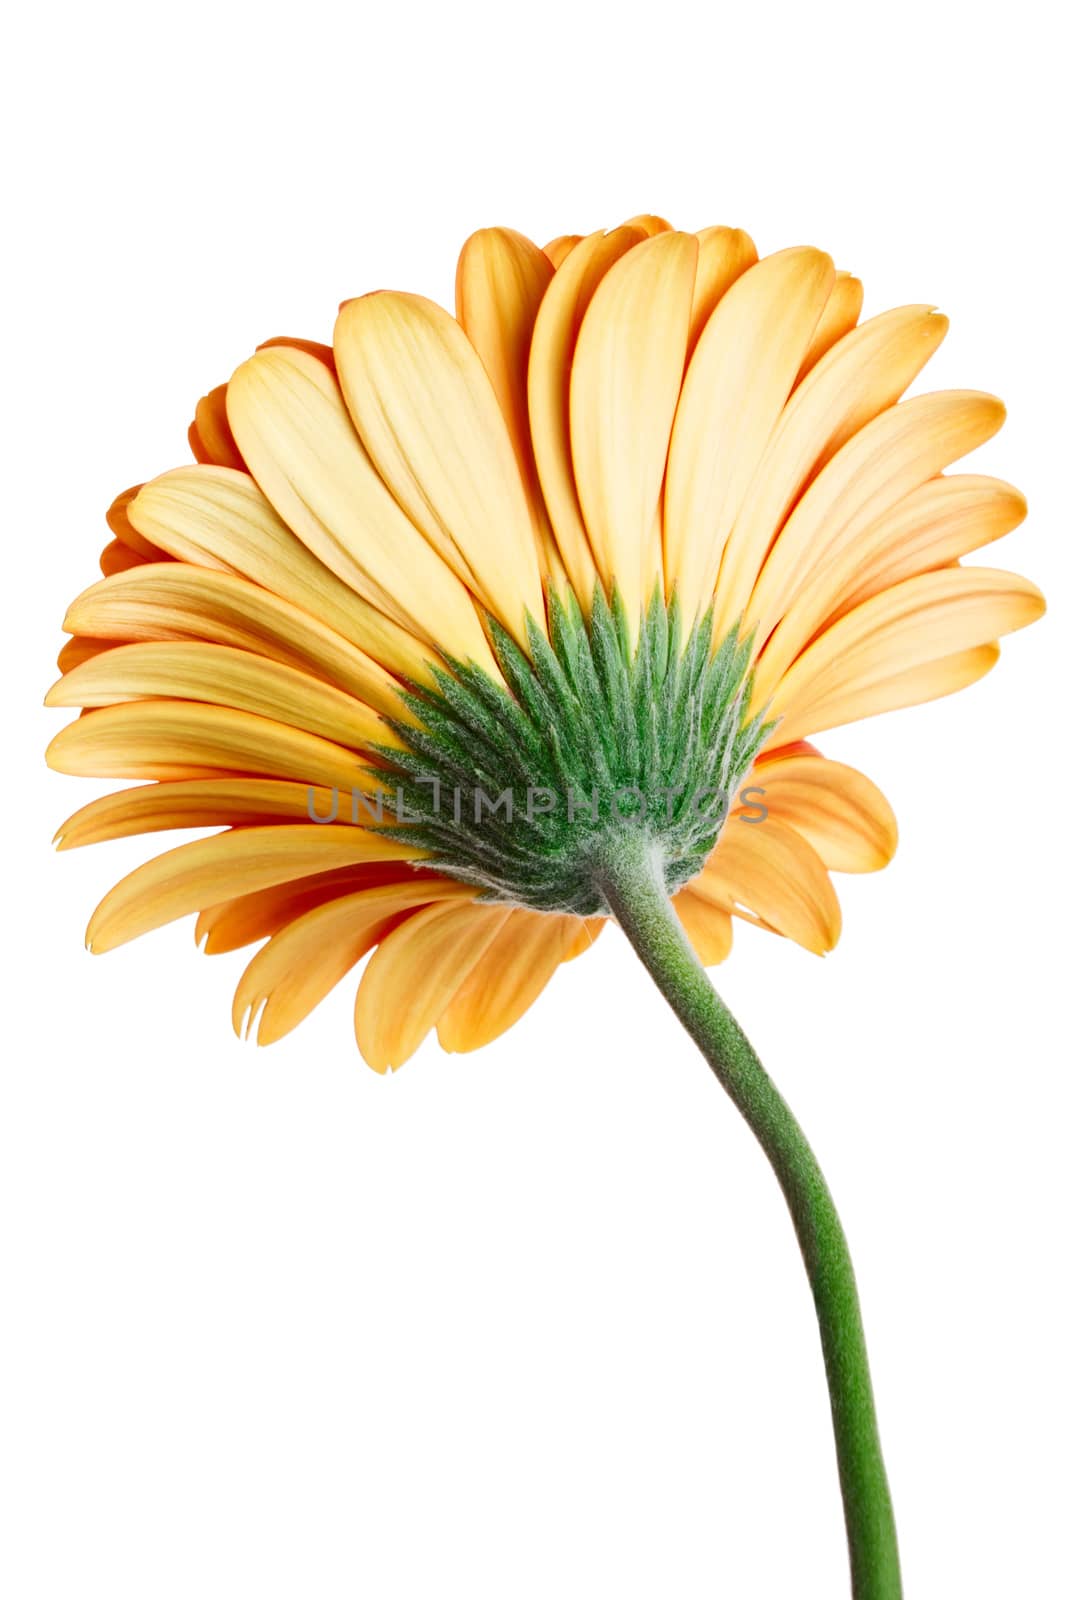 Back side view of gerber daisy flower isolated on white background